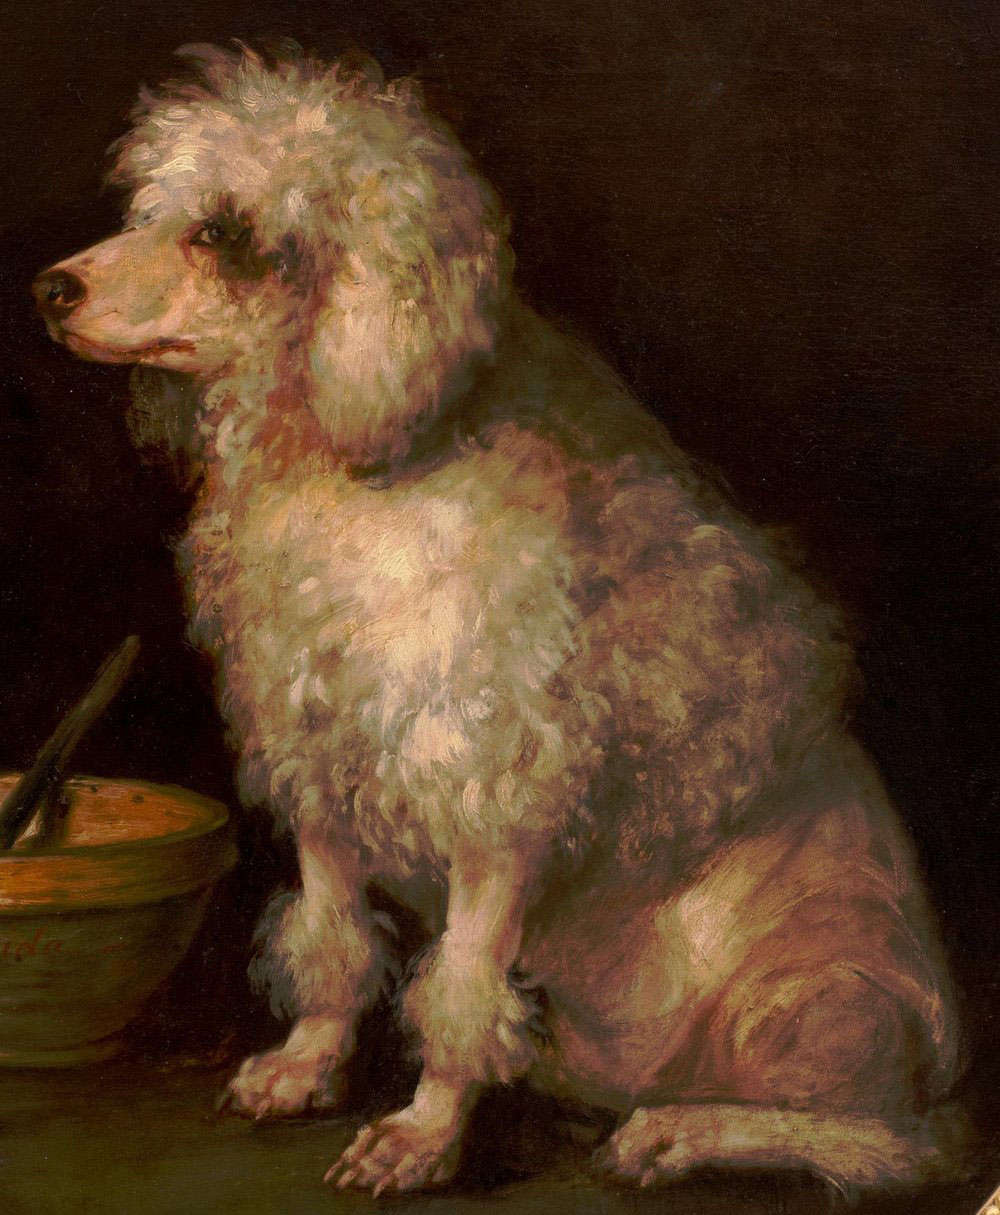 History of the Poodle